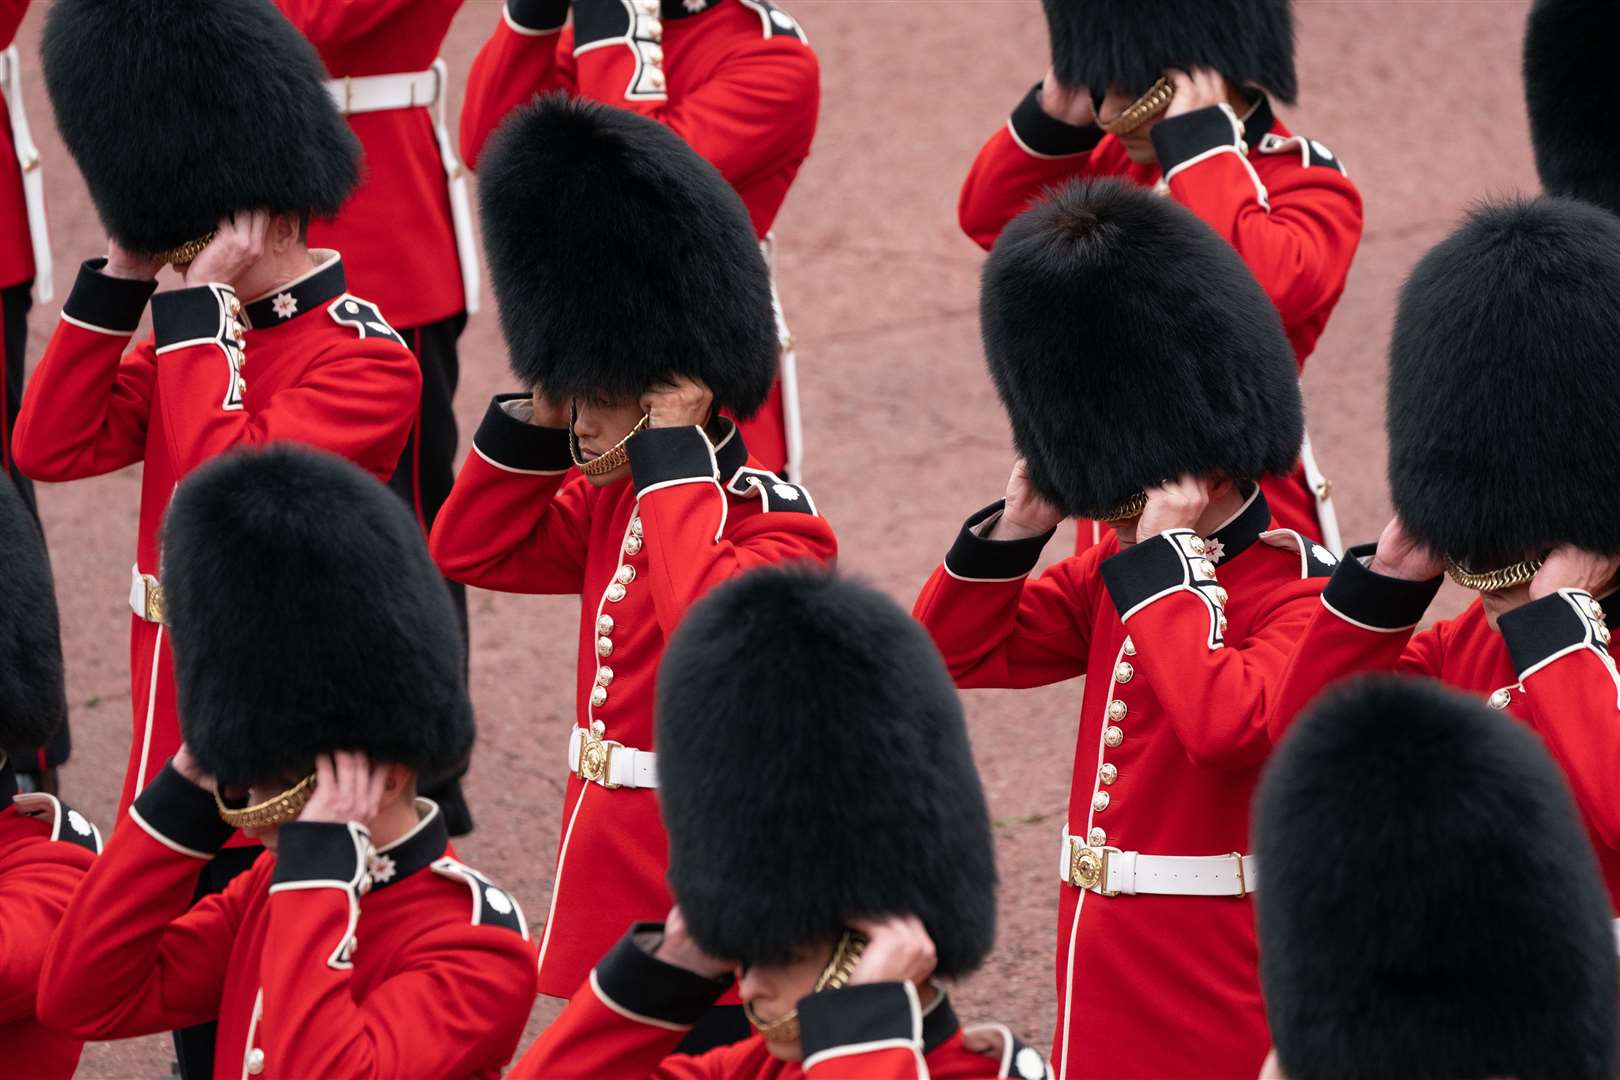 The King’s Guard continues to wear bearskin hats as part of their ceremonial dress (Joe Giddens/PA)